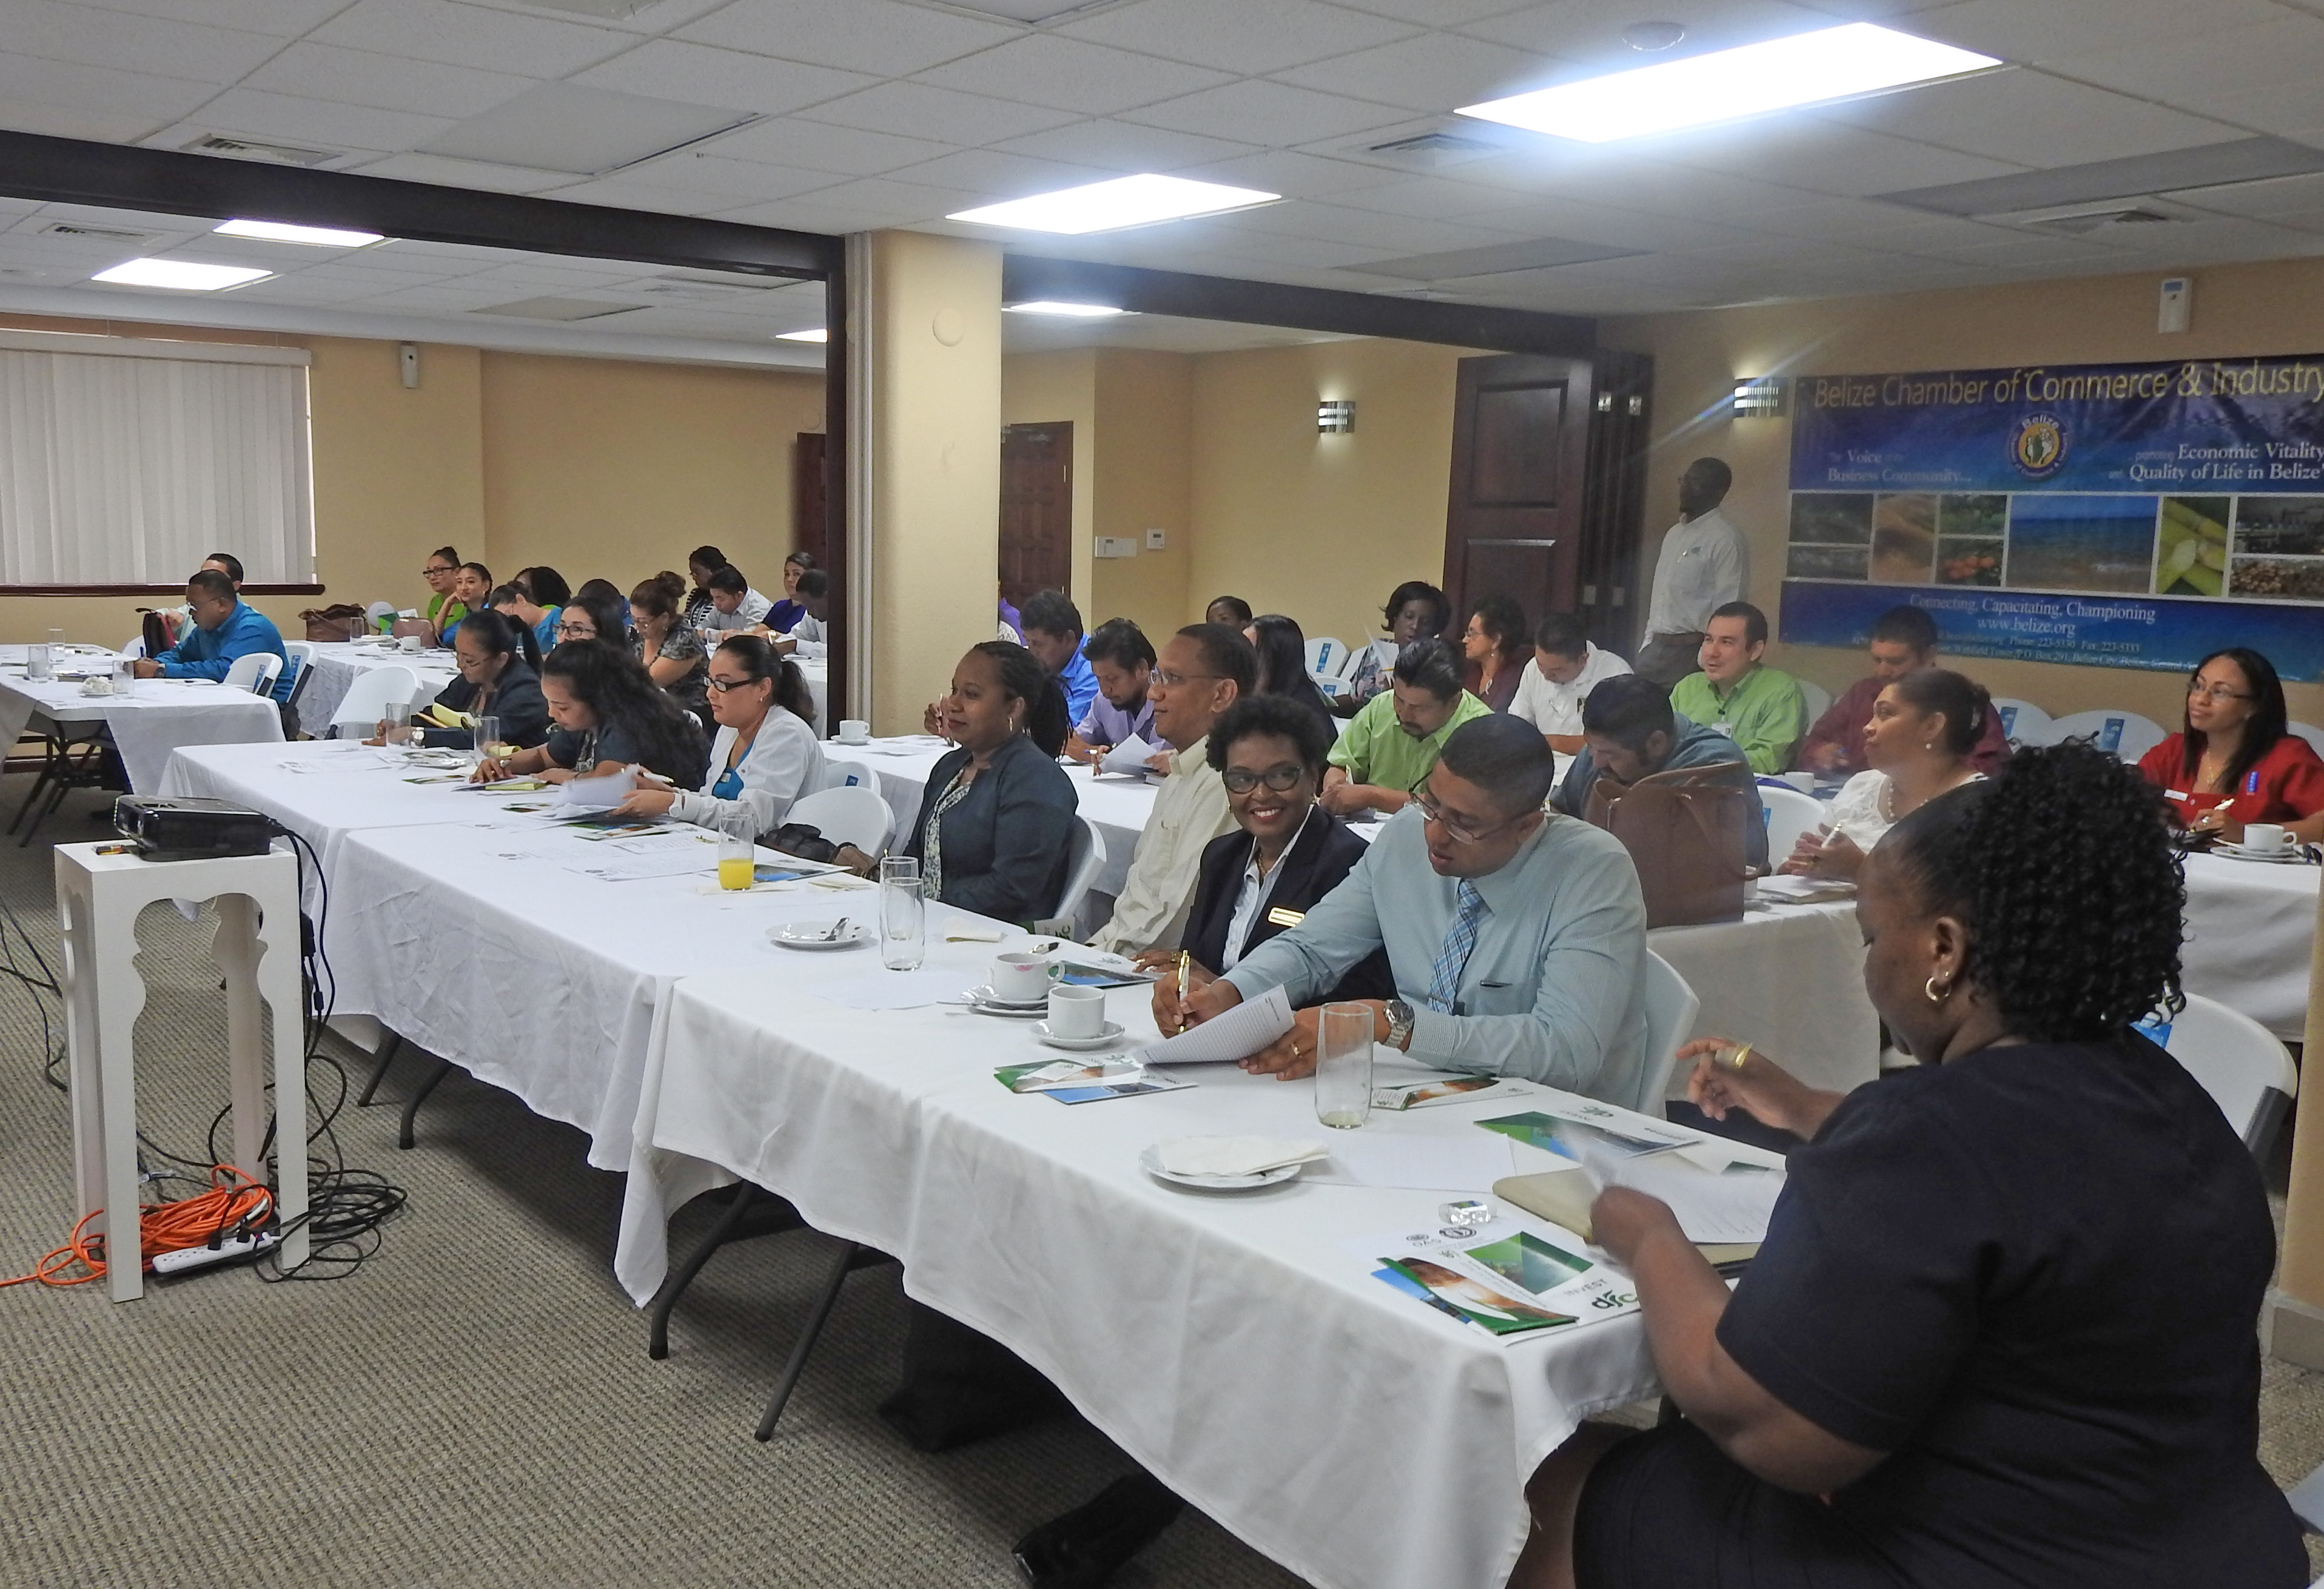 OAS Belize Office Partnered with Belize Chamber of Commerce to Celebrate OAS’ 70th Anniversary(July 19, 2018)